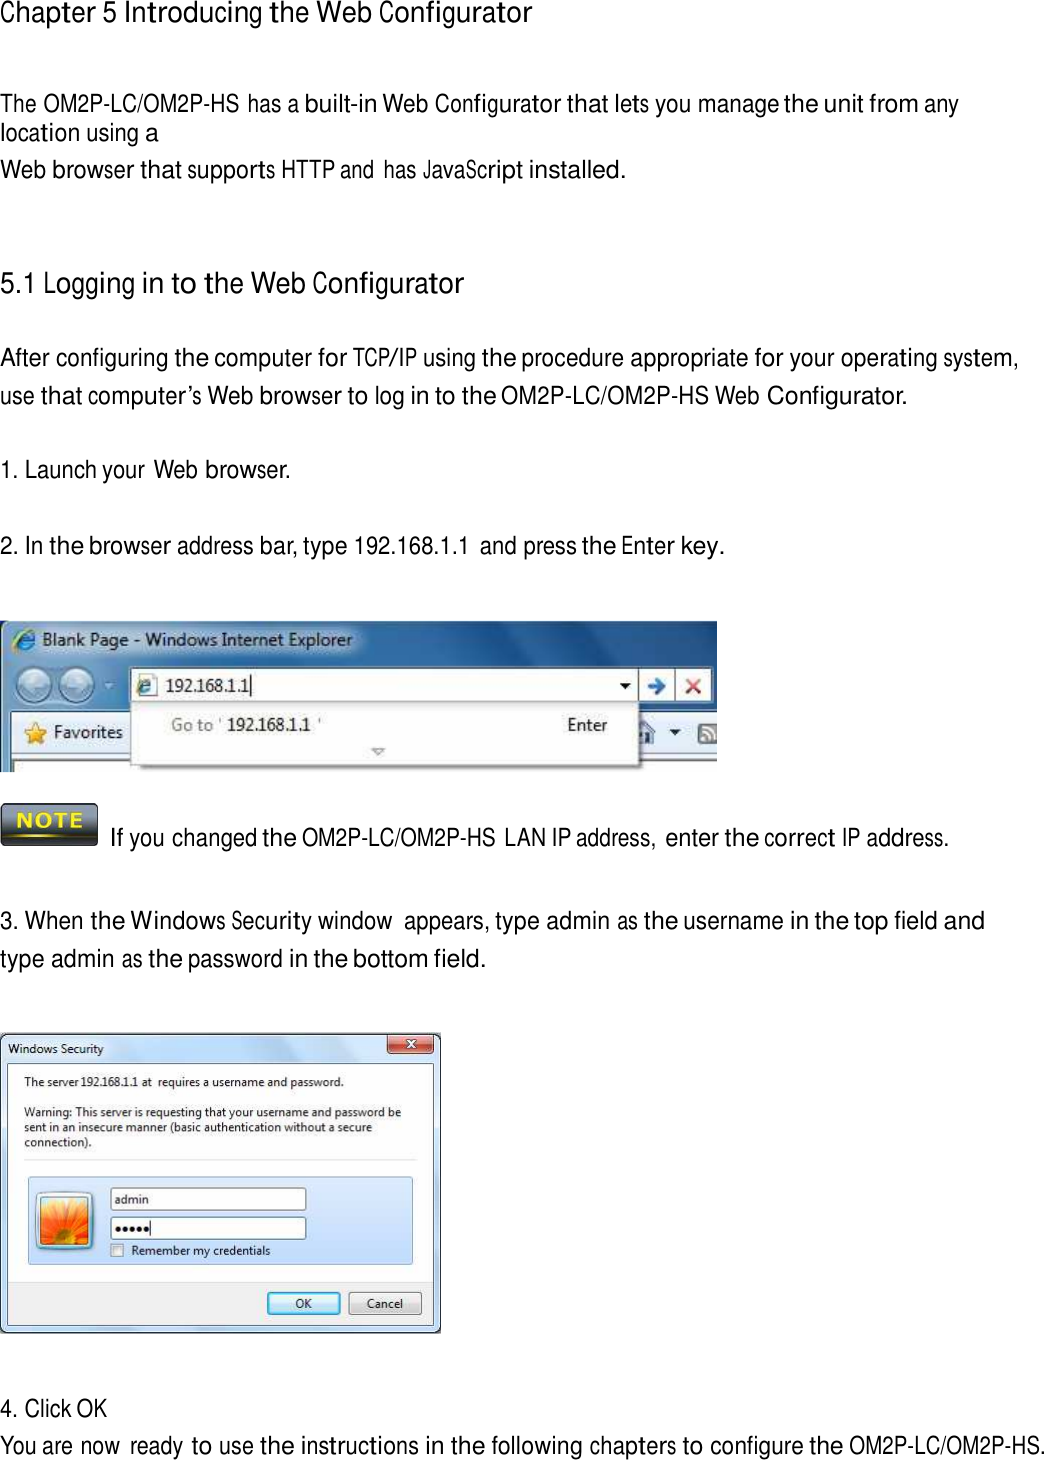 Chapter 5 Introducing the Web Configurator     The OM2P-LC/OM2P-HS has a built-in Web Configurator that lets you manage the unit from any location using a Web browser that supports HTTP and  has JavaScript installed.     5.1 Logging in to the Web Configurator   After configuring the computer for TCP/IP using the procedure appropriate for your operating system, use that computer’s Web browser to log in to the OM2P-LC/OM2P-HS Web Configurator.   1. Launch your Web browser.   2. In the browser address bar, type 192.168.1.1  and press the Enter key.       If you changed the OM2P-LC/OM2P-HS LAN IP address, enter the correct IP address.    3. When the Windows Security window  appears, type admin as the username in the top field and type admin as the password in the bottom field.        4. Click OK You are now  ready to use the instructions in the following chapters to configure the OM2P-LC/OM2P-HS. 